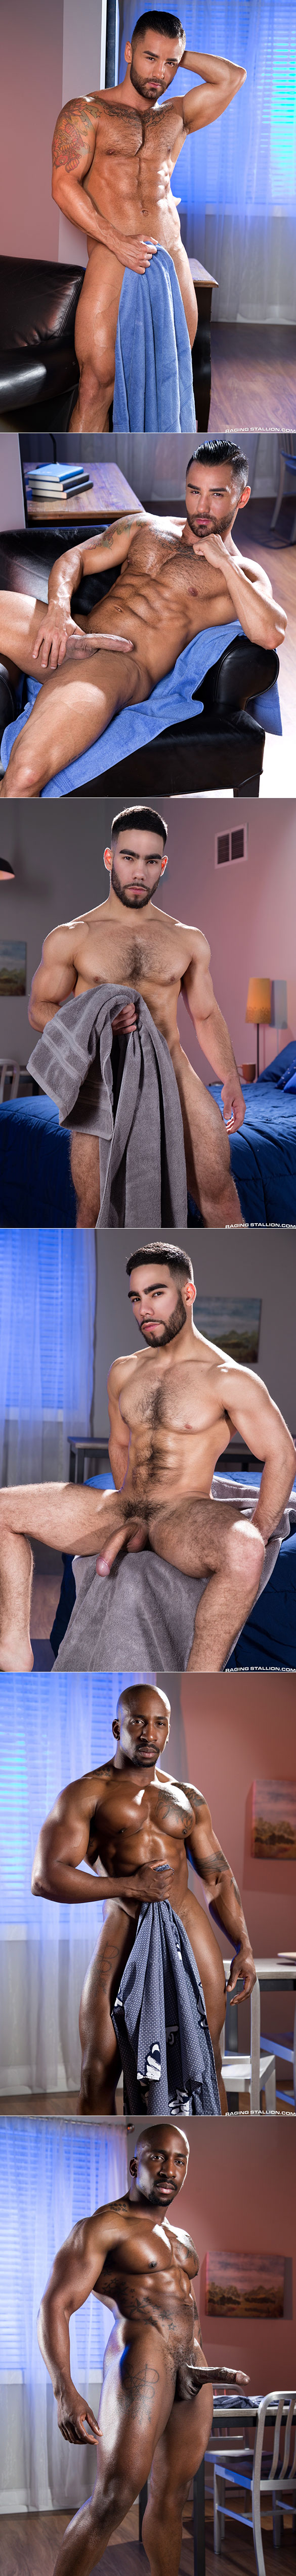 Raging Stallion: Bruno Bernal bottoms for Max Konnor and Papi Suave in "The Super"